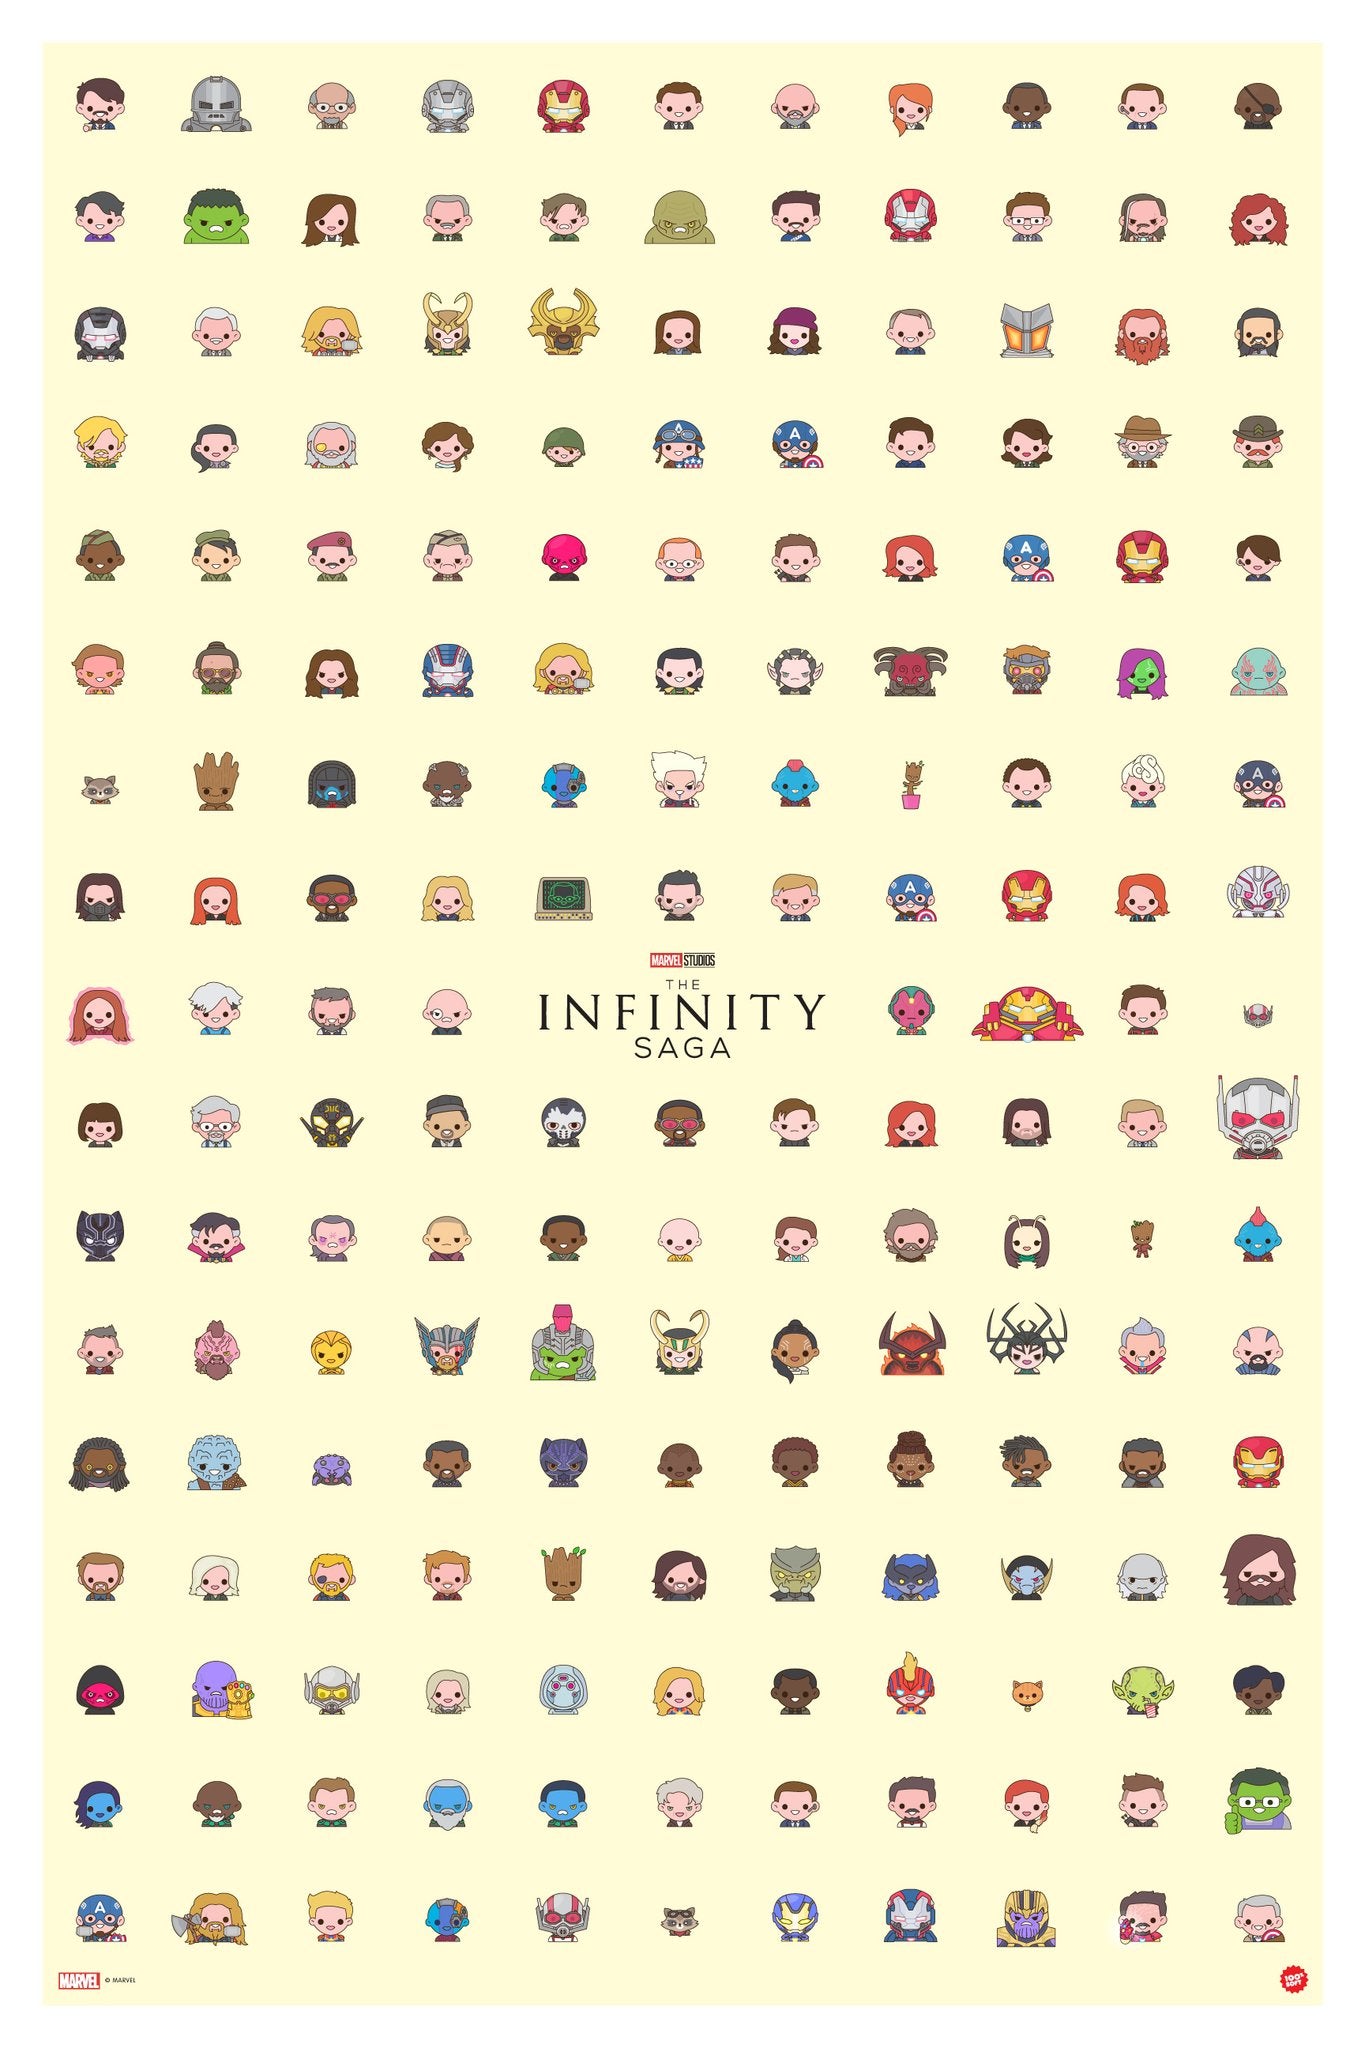 The Infinity Saga poster by 100% Soft. (Image: Marvel/100% Soft)